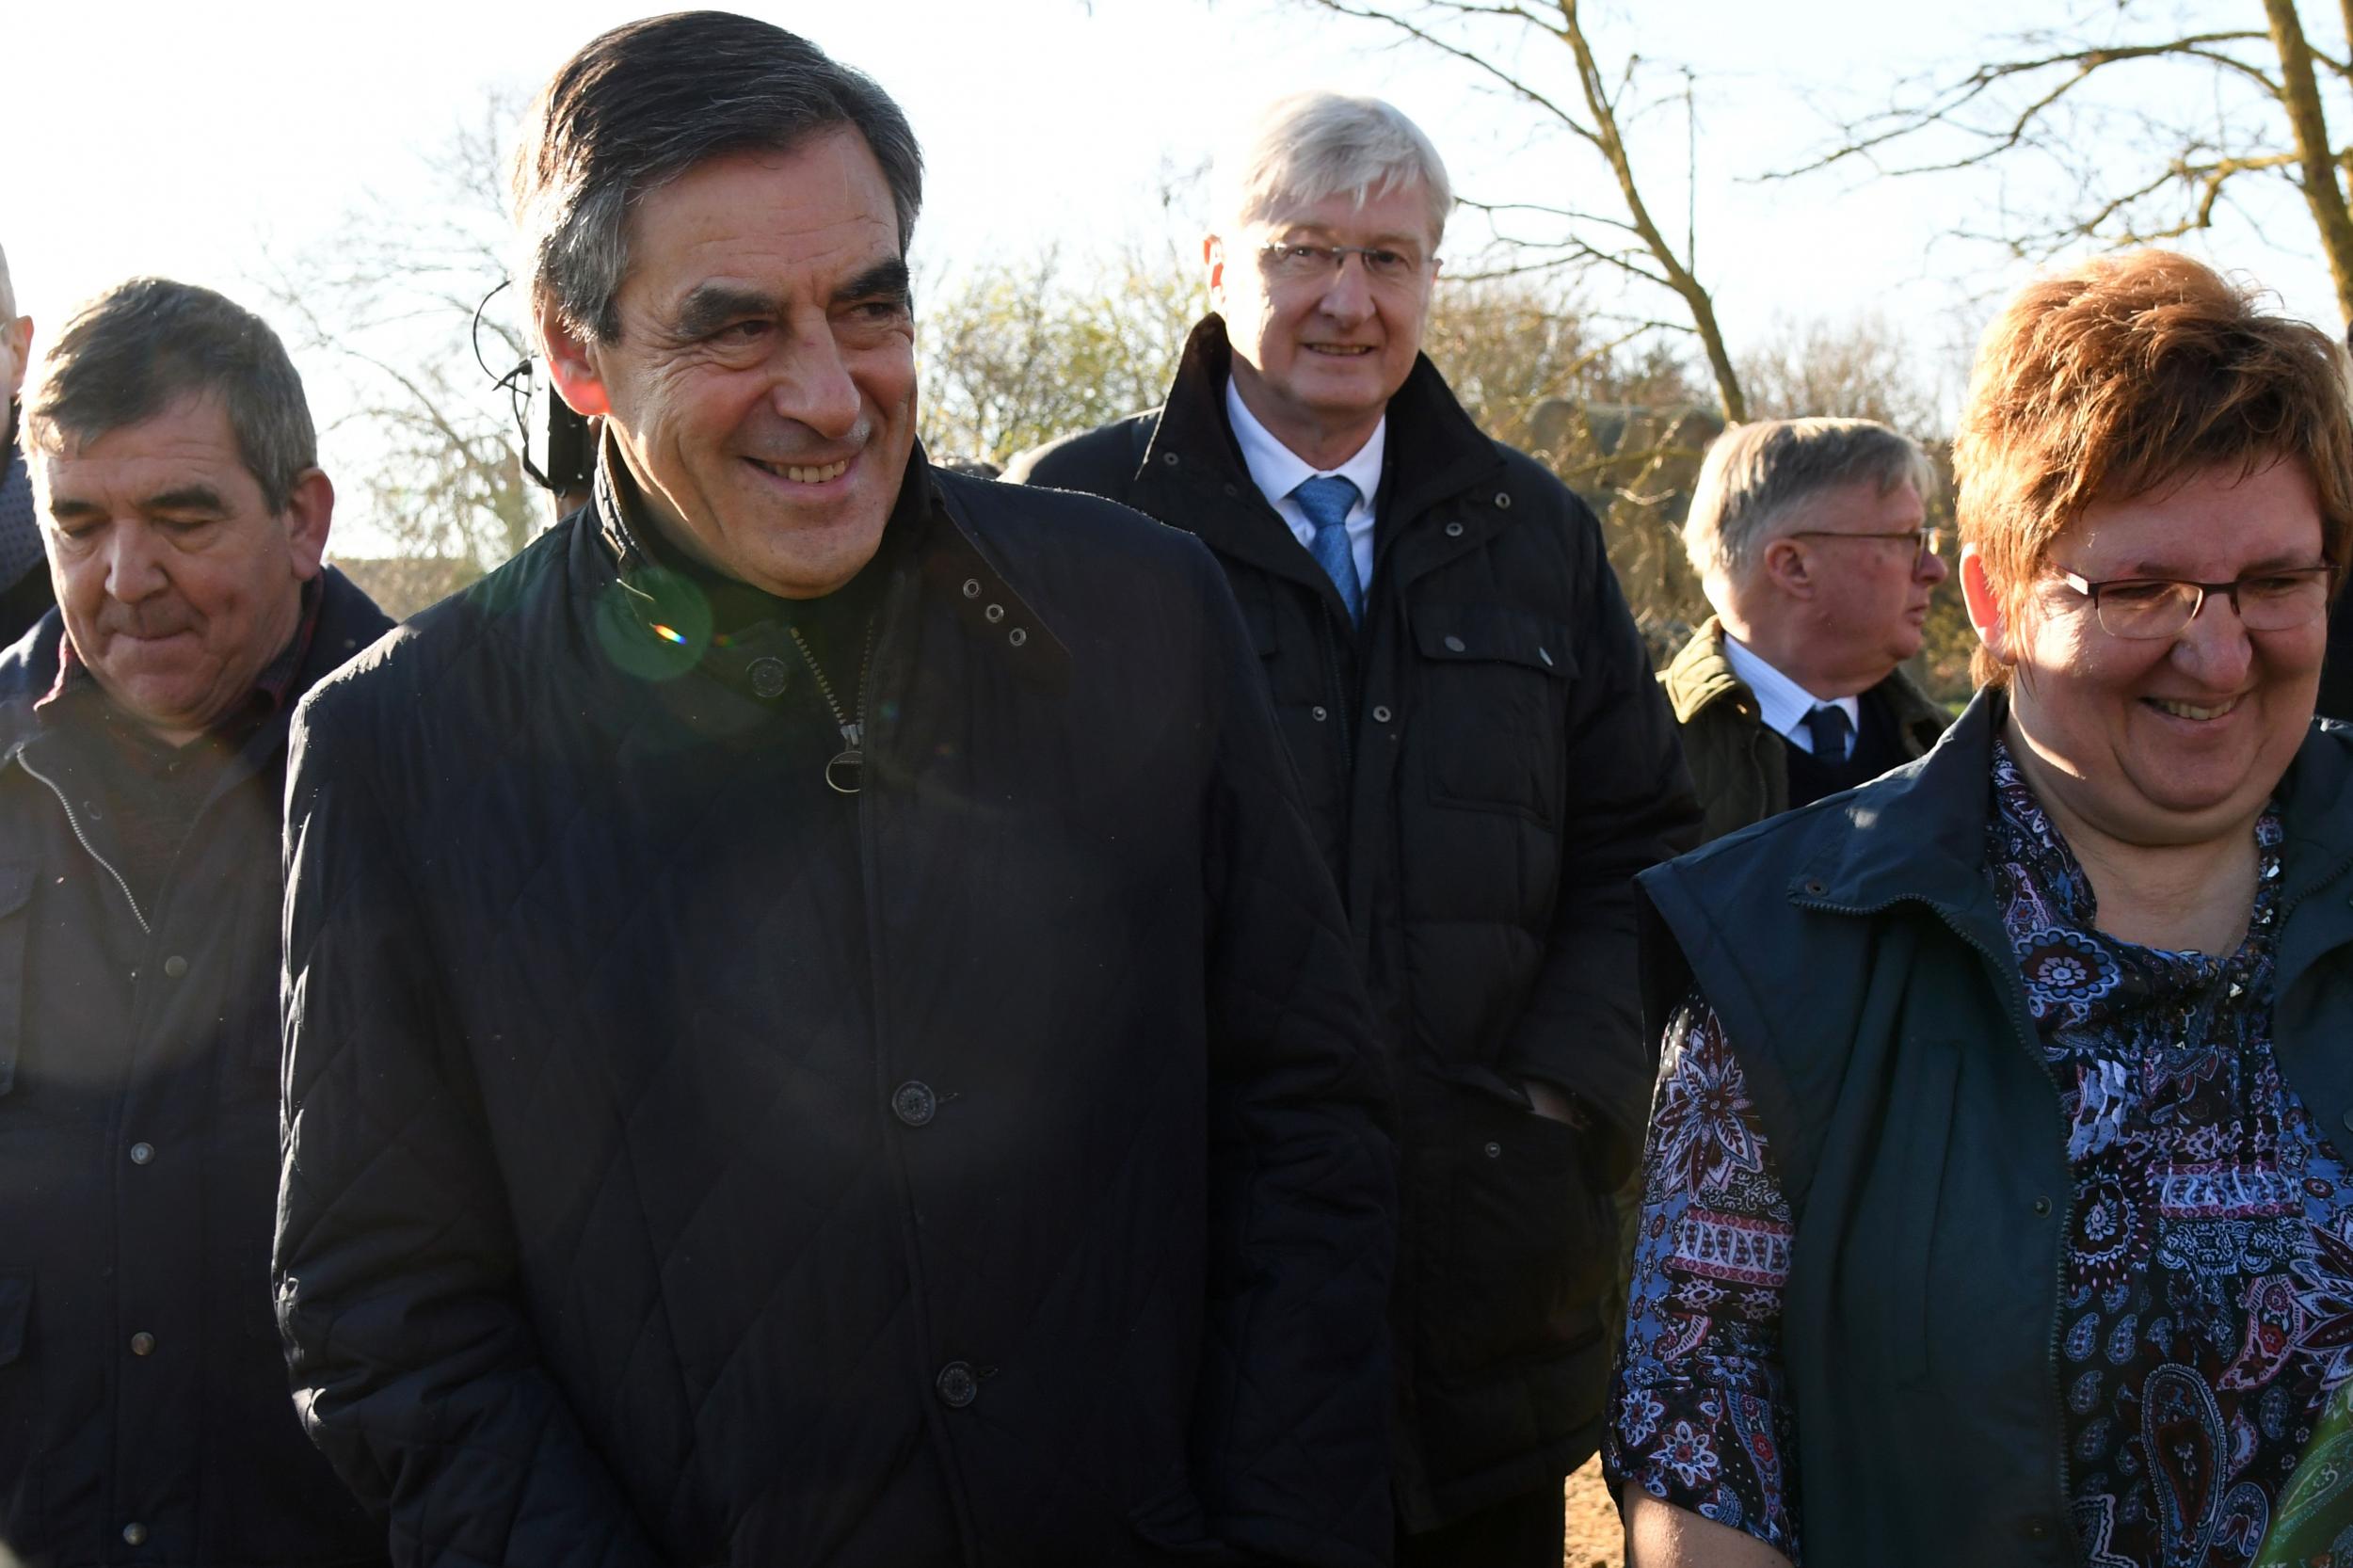 Winner of the right-wing primaries ahead of France's 2017 presidential elections, Francois Fillon